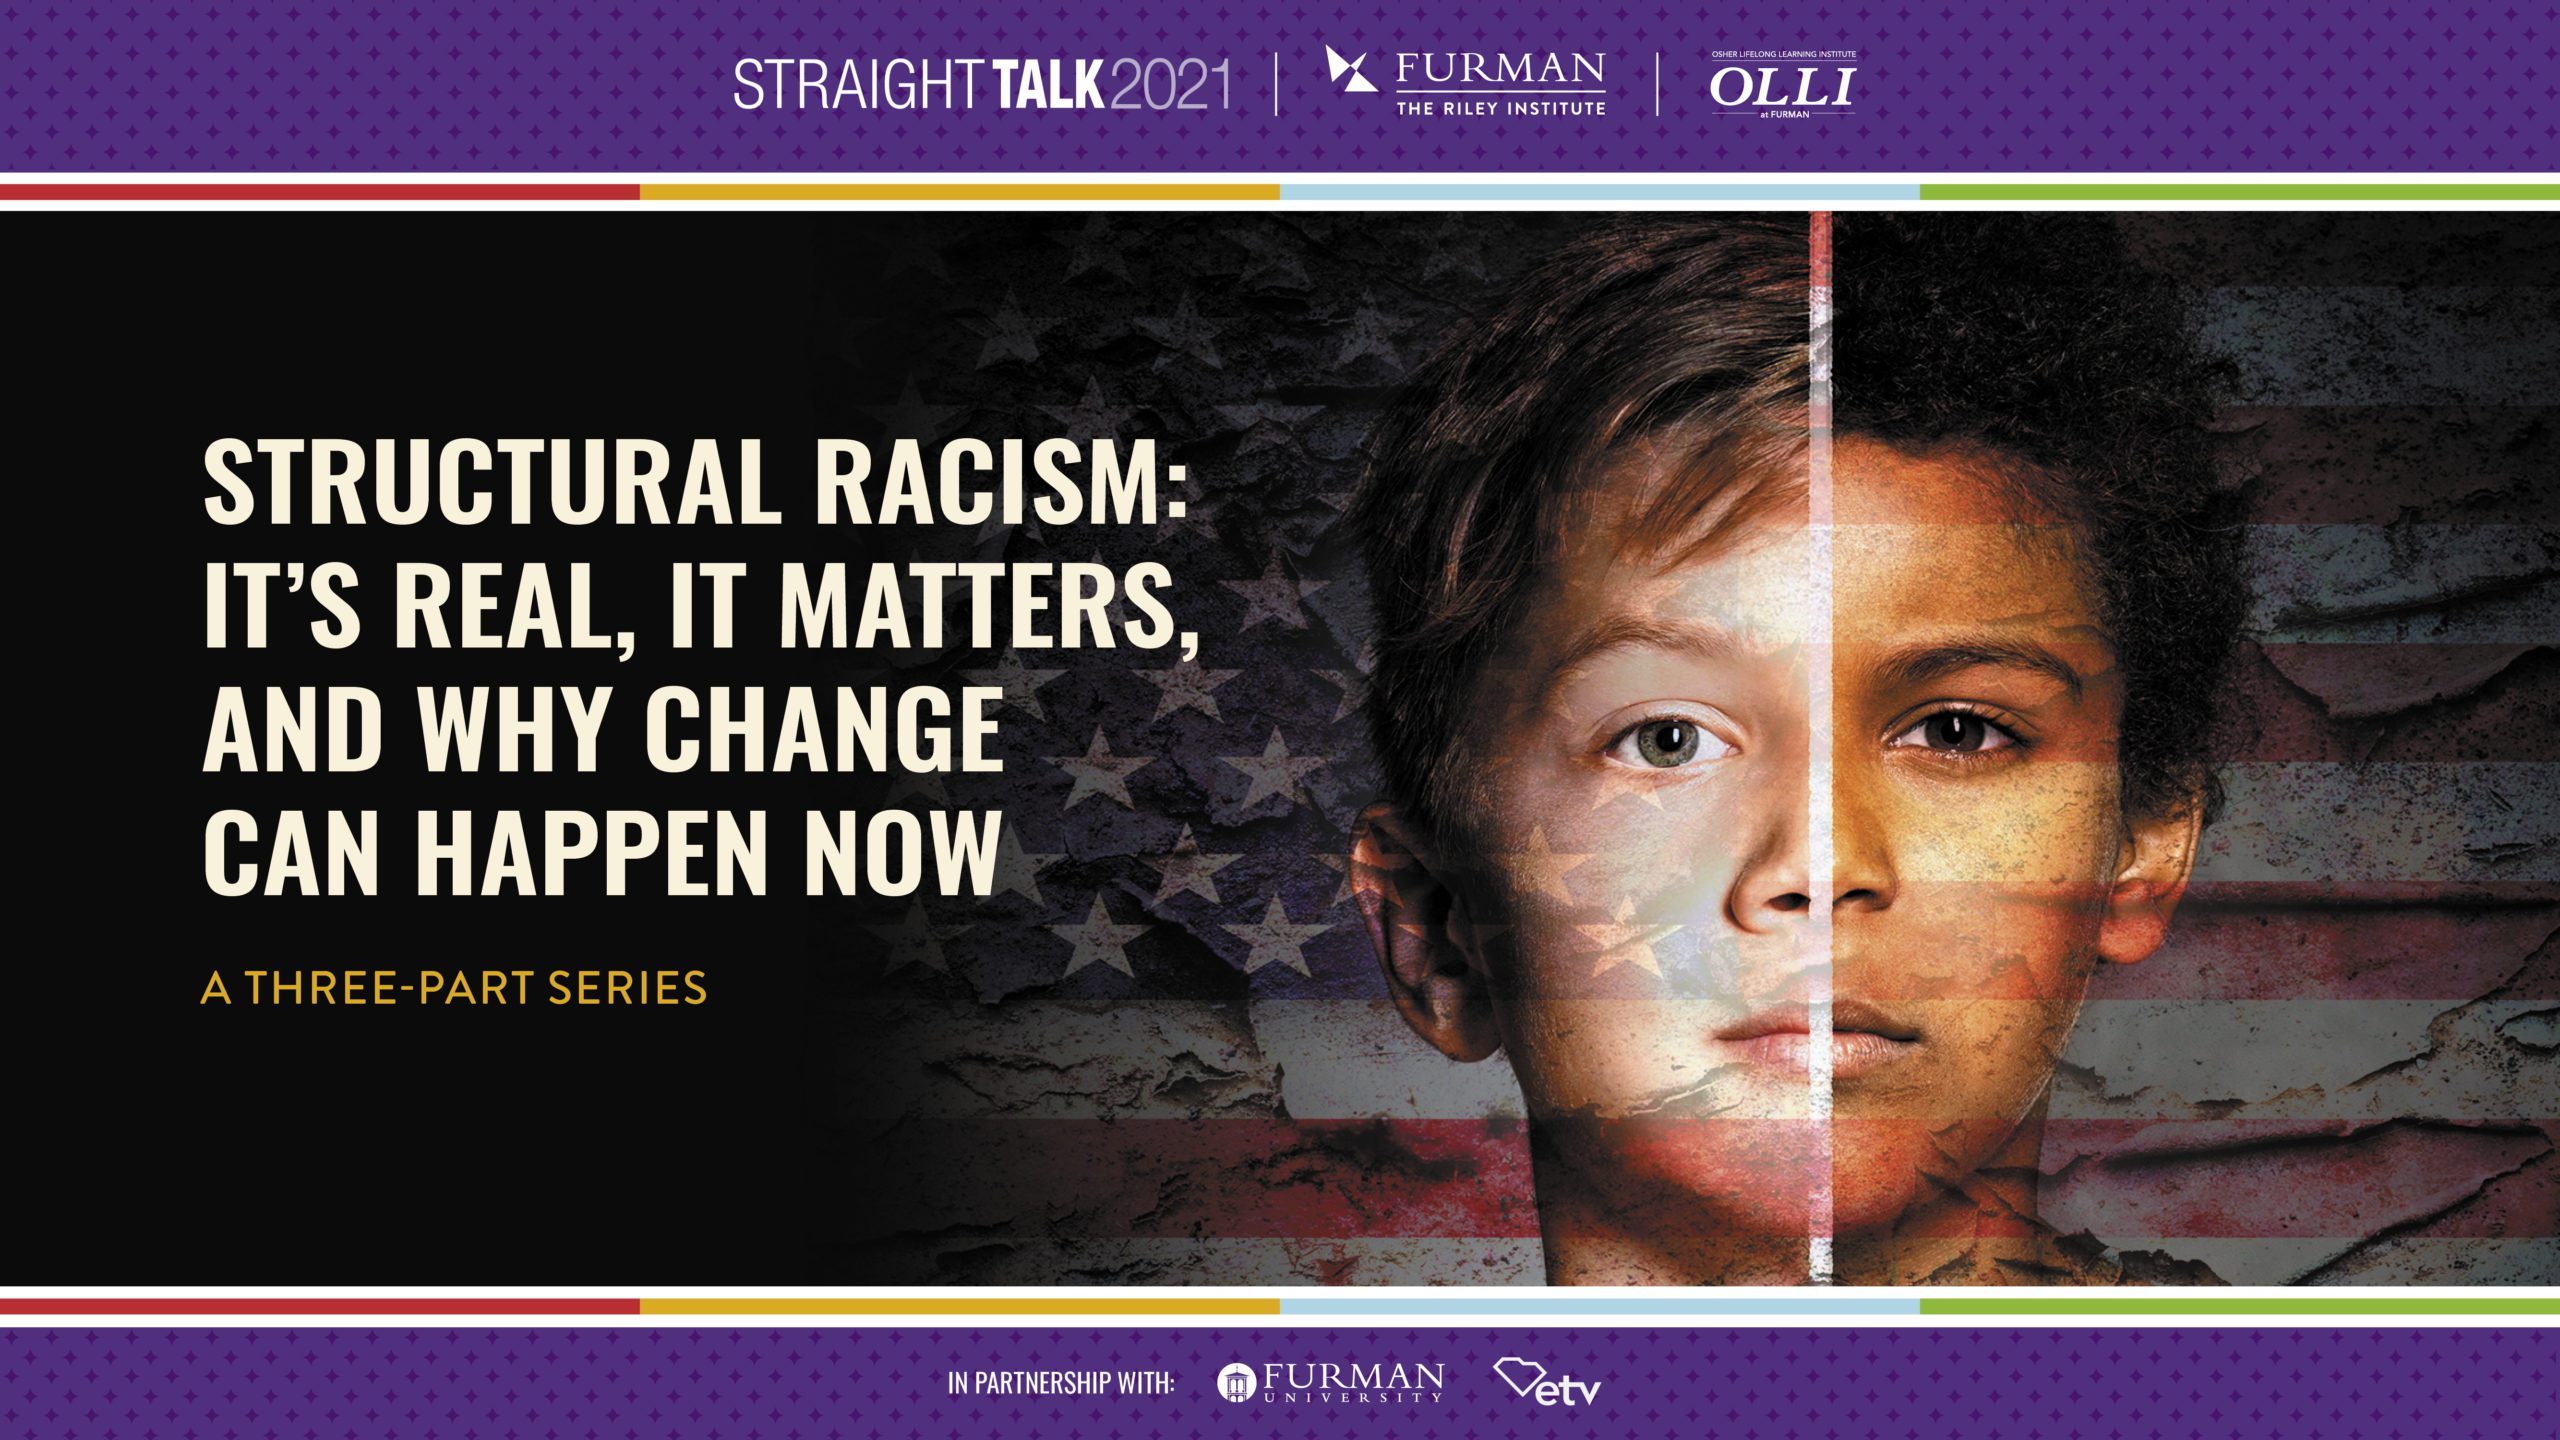 The graphic is a composite image of two faces. On the left side, half the face of a white boy appears. On the right side, half the face of a black boy appears.